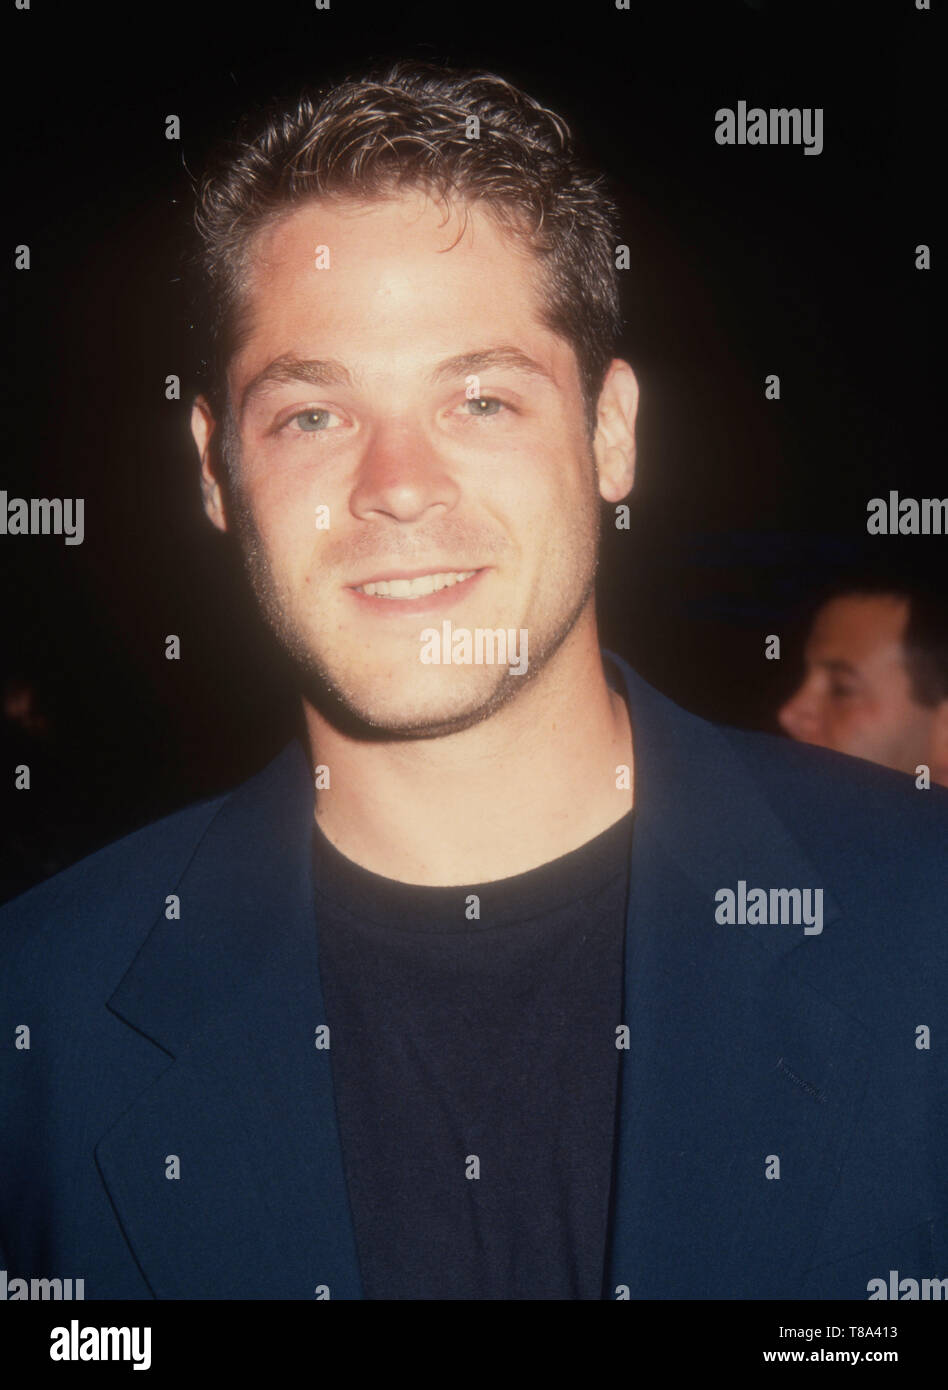 Hollywood, California, USA 13th April 1994 Actor David Barry Gray attends the 'Backbeat' Hollywood Premiere on April 13, 1994 at Galaxy Theatre in Hollywood, California, USA. Photo by Barry King/Alamy Stock Photo Stock Photo